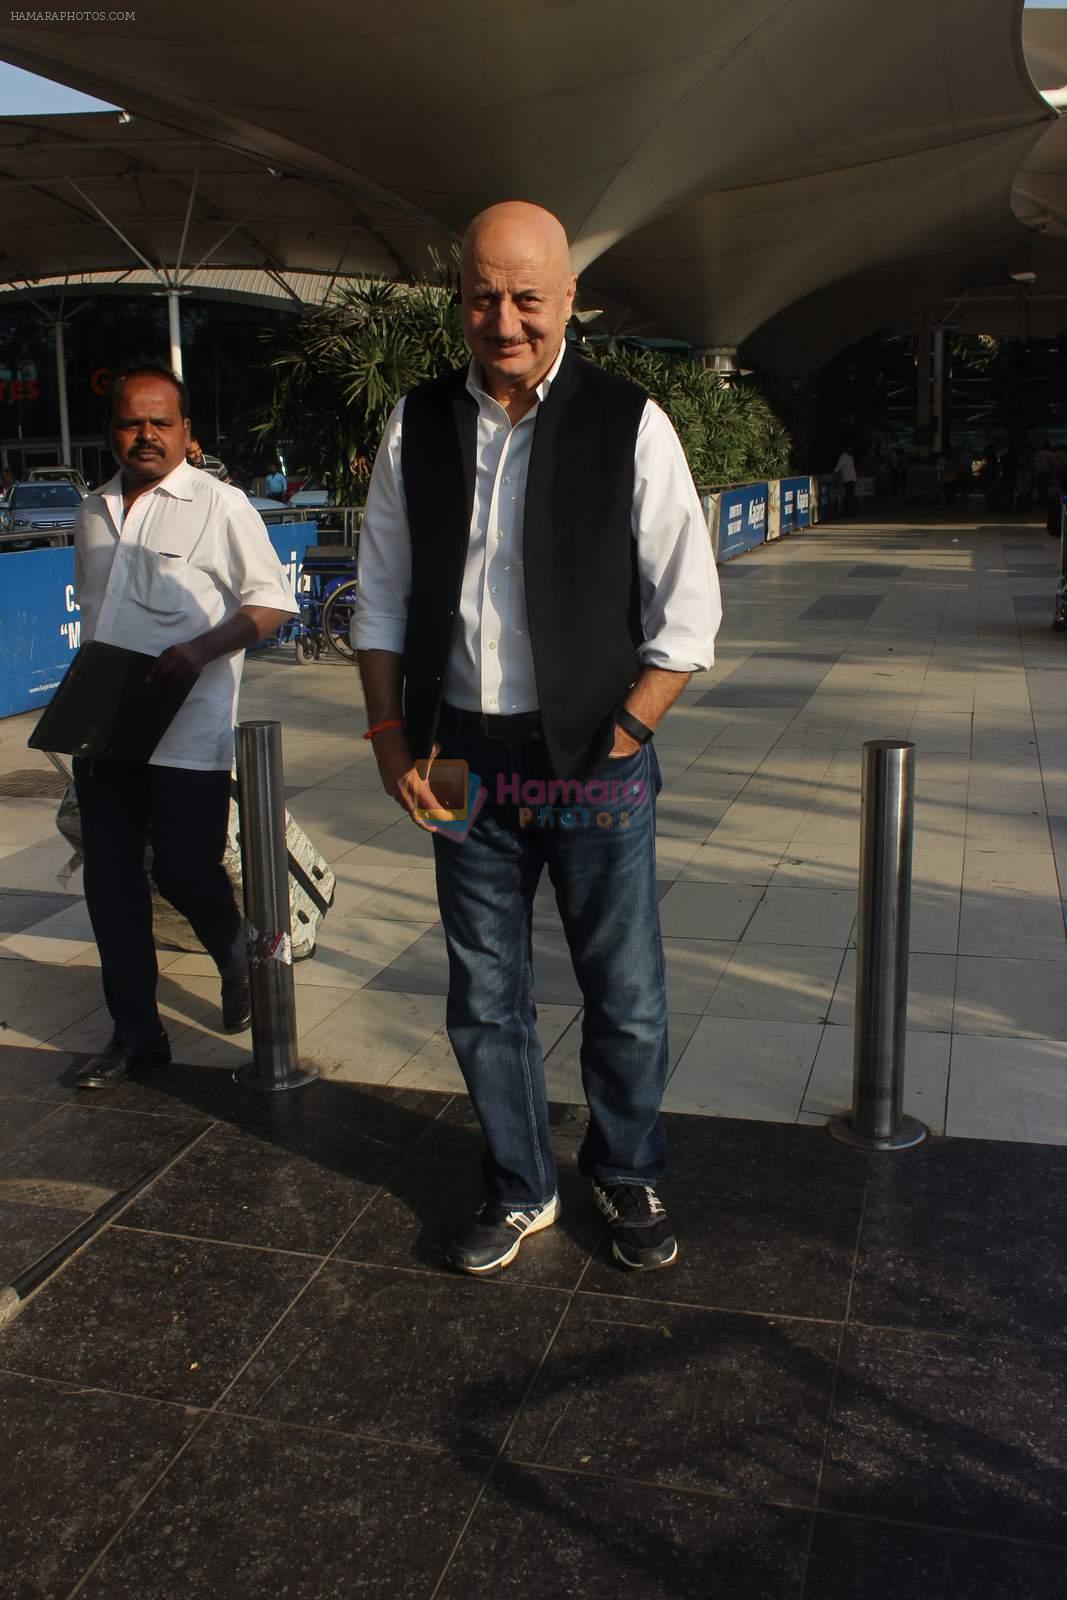 Anupam Kher snapped at the airport on 21st Jan 2016